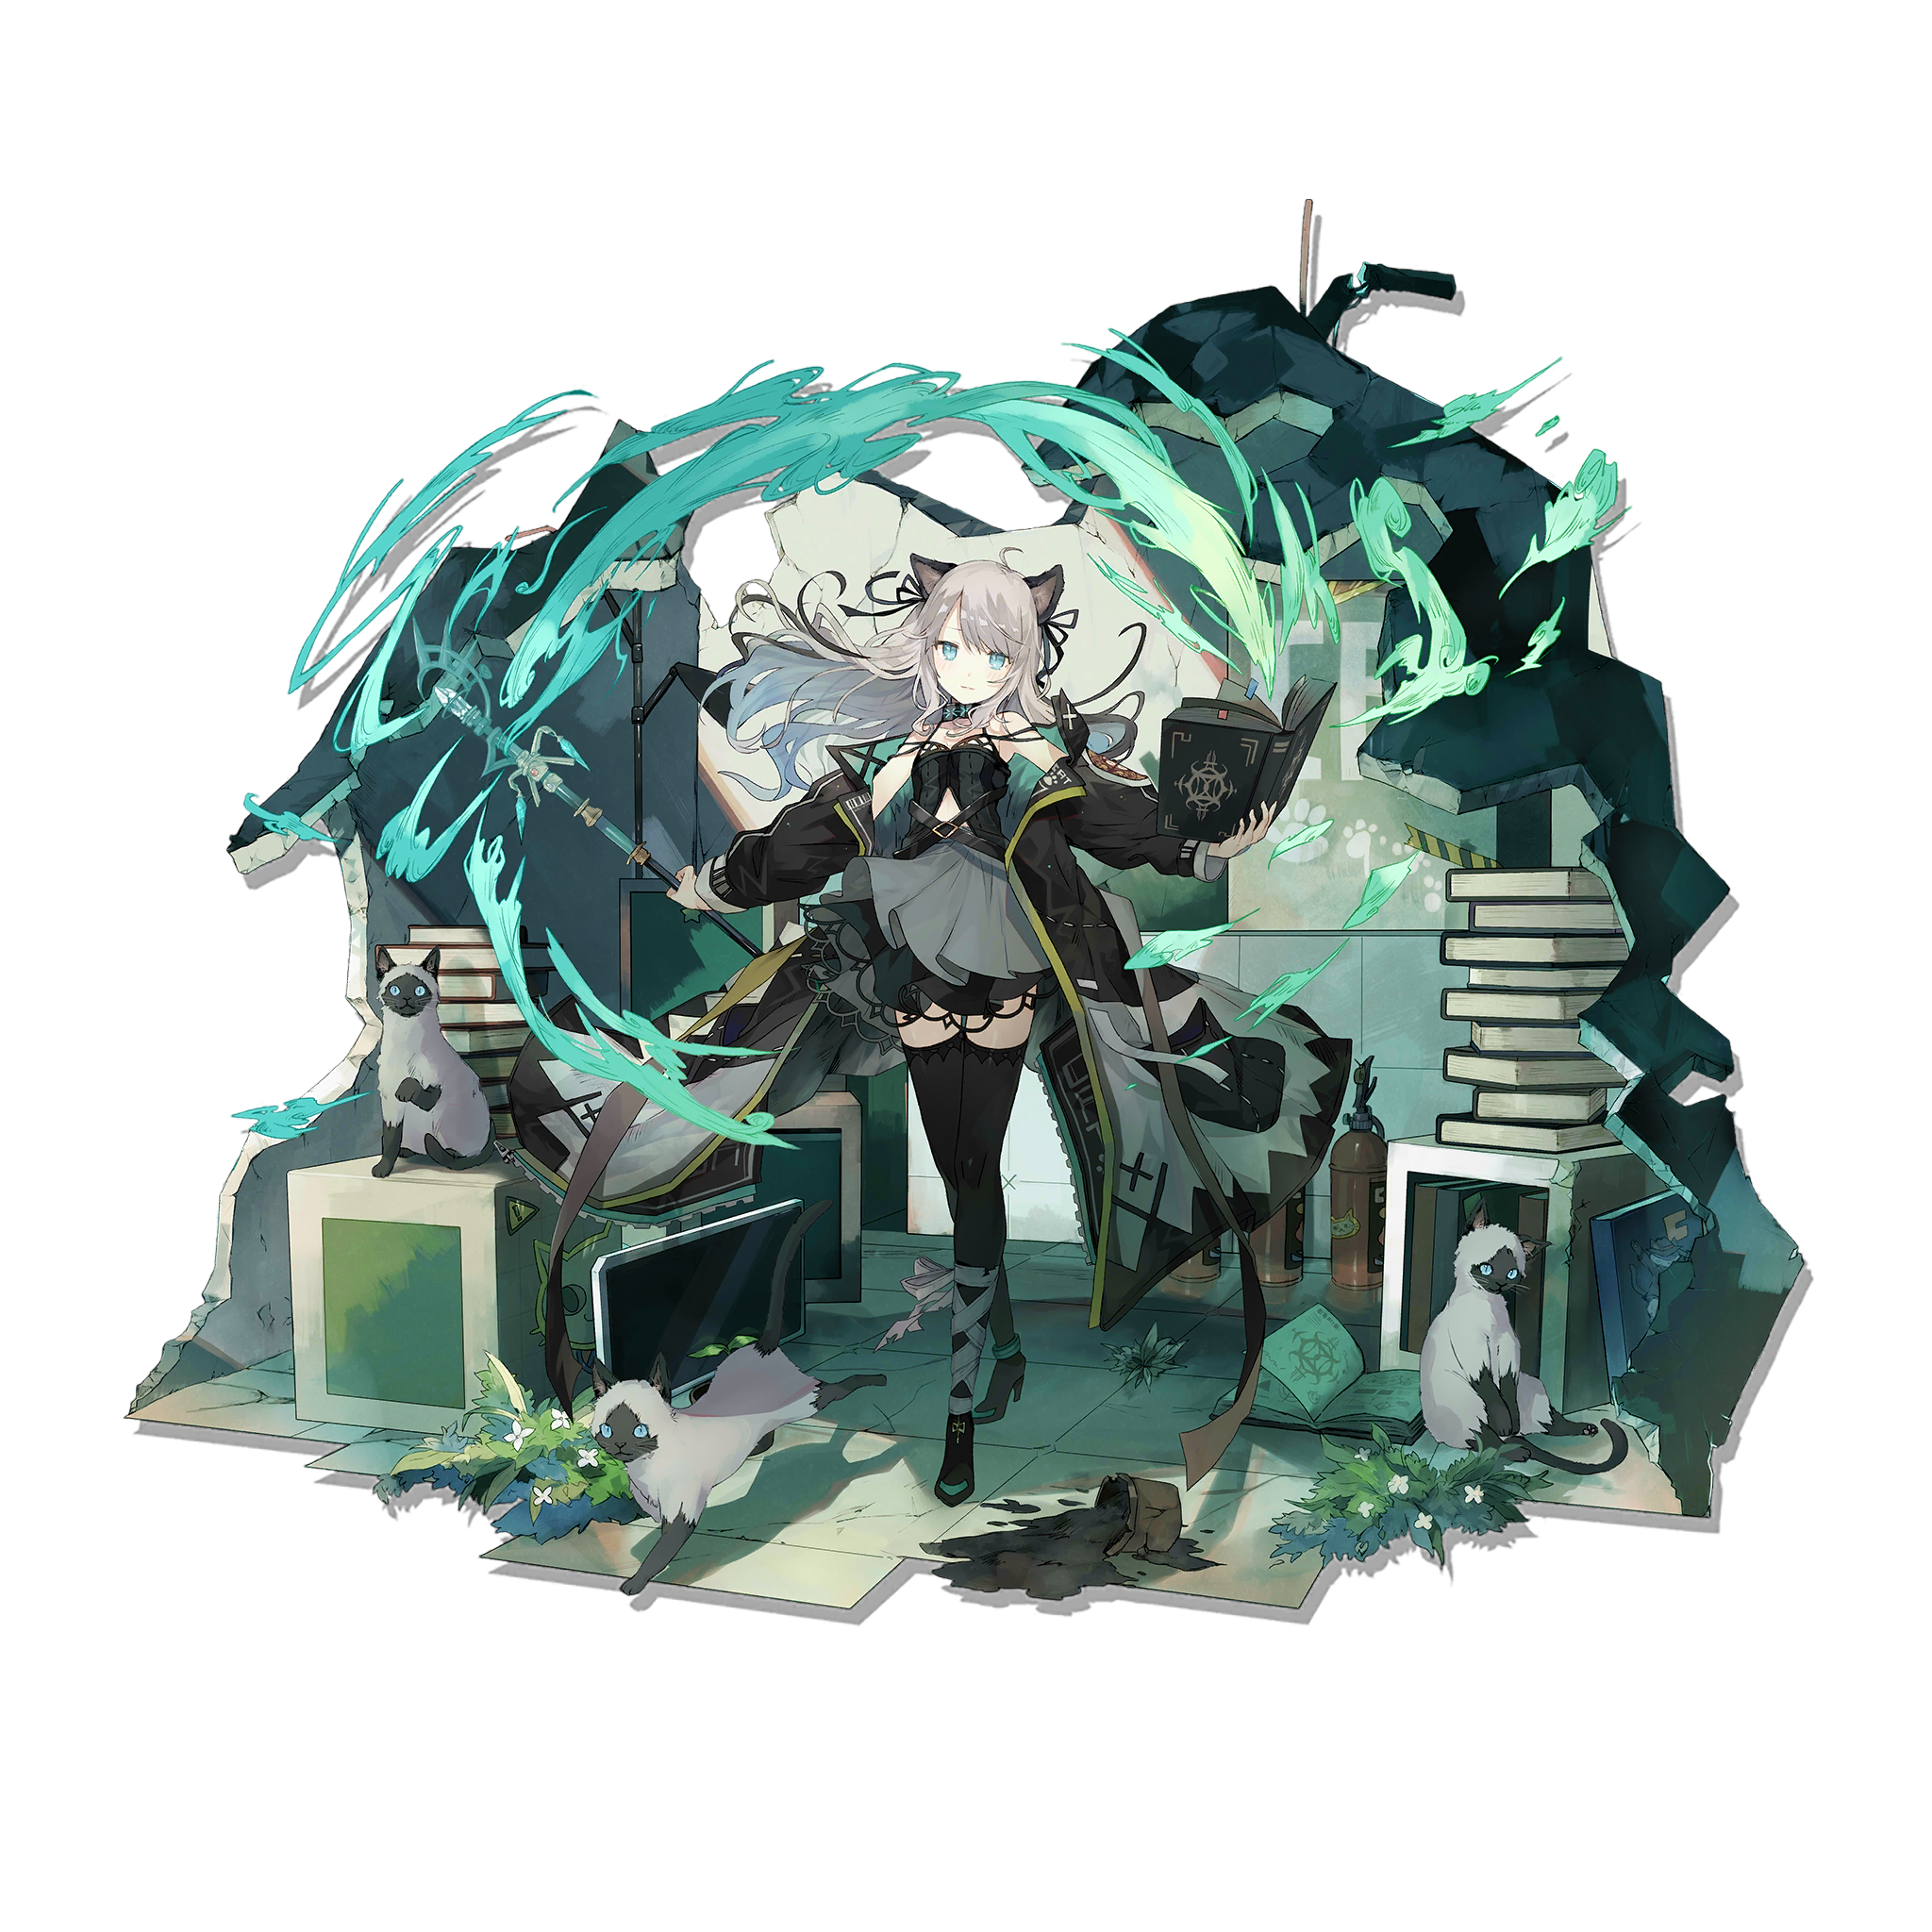 Pack 薄绿 skin 0 2.png